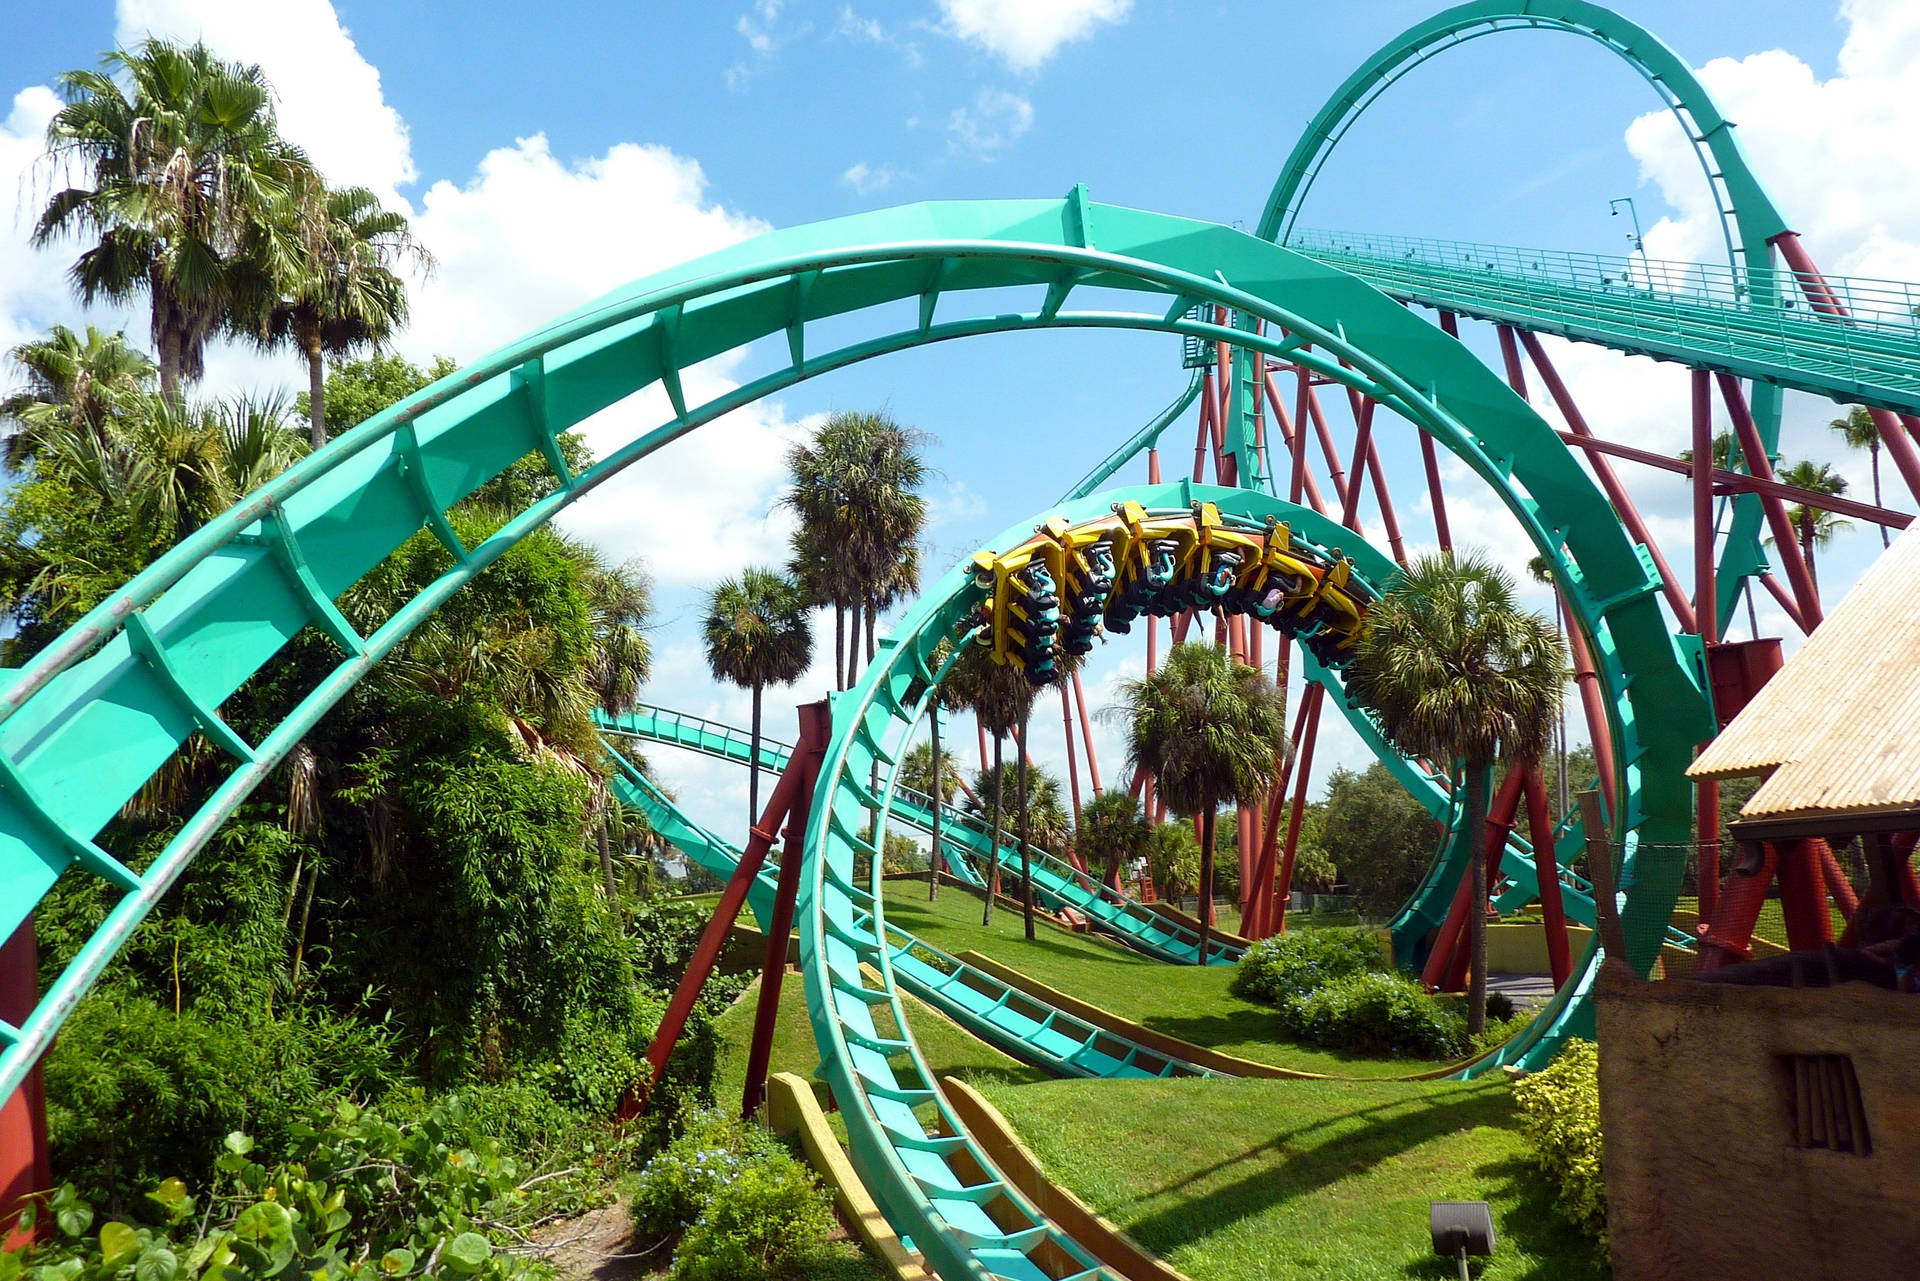 Exciting Ride On A Teal-colored Roller Coaster Background